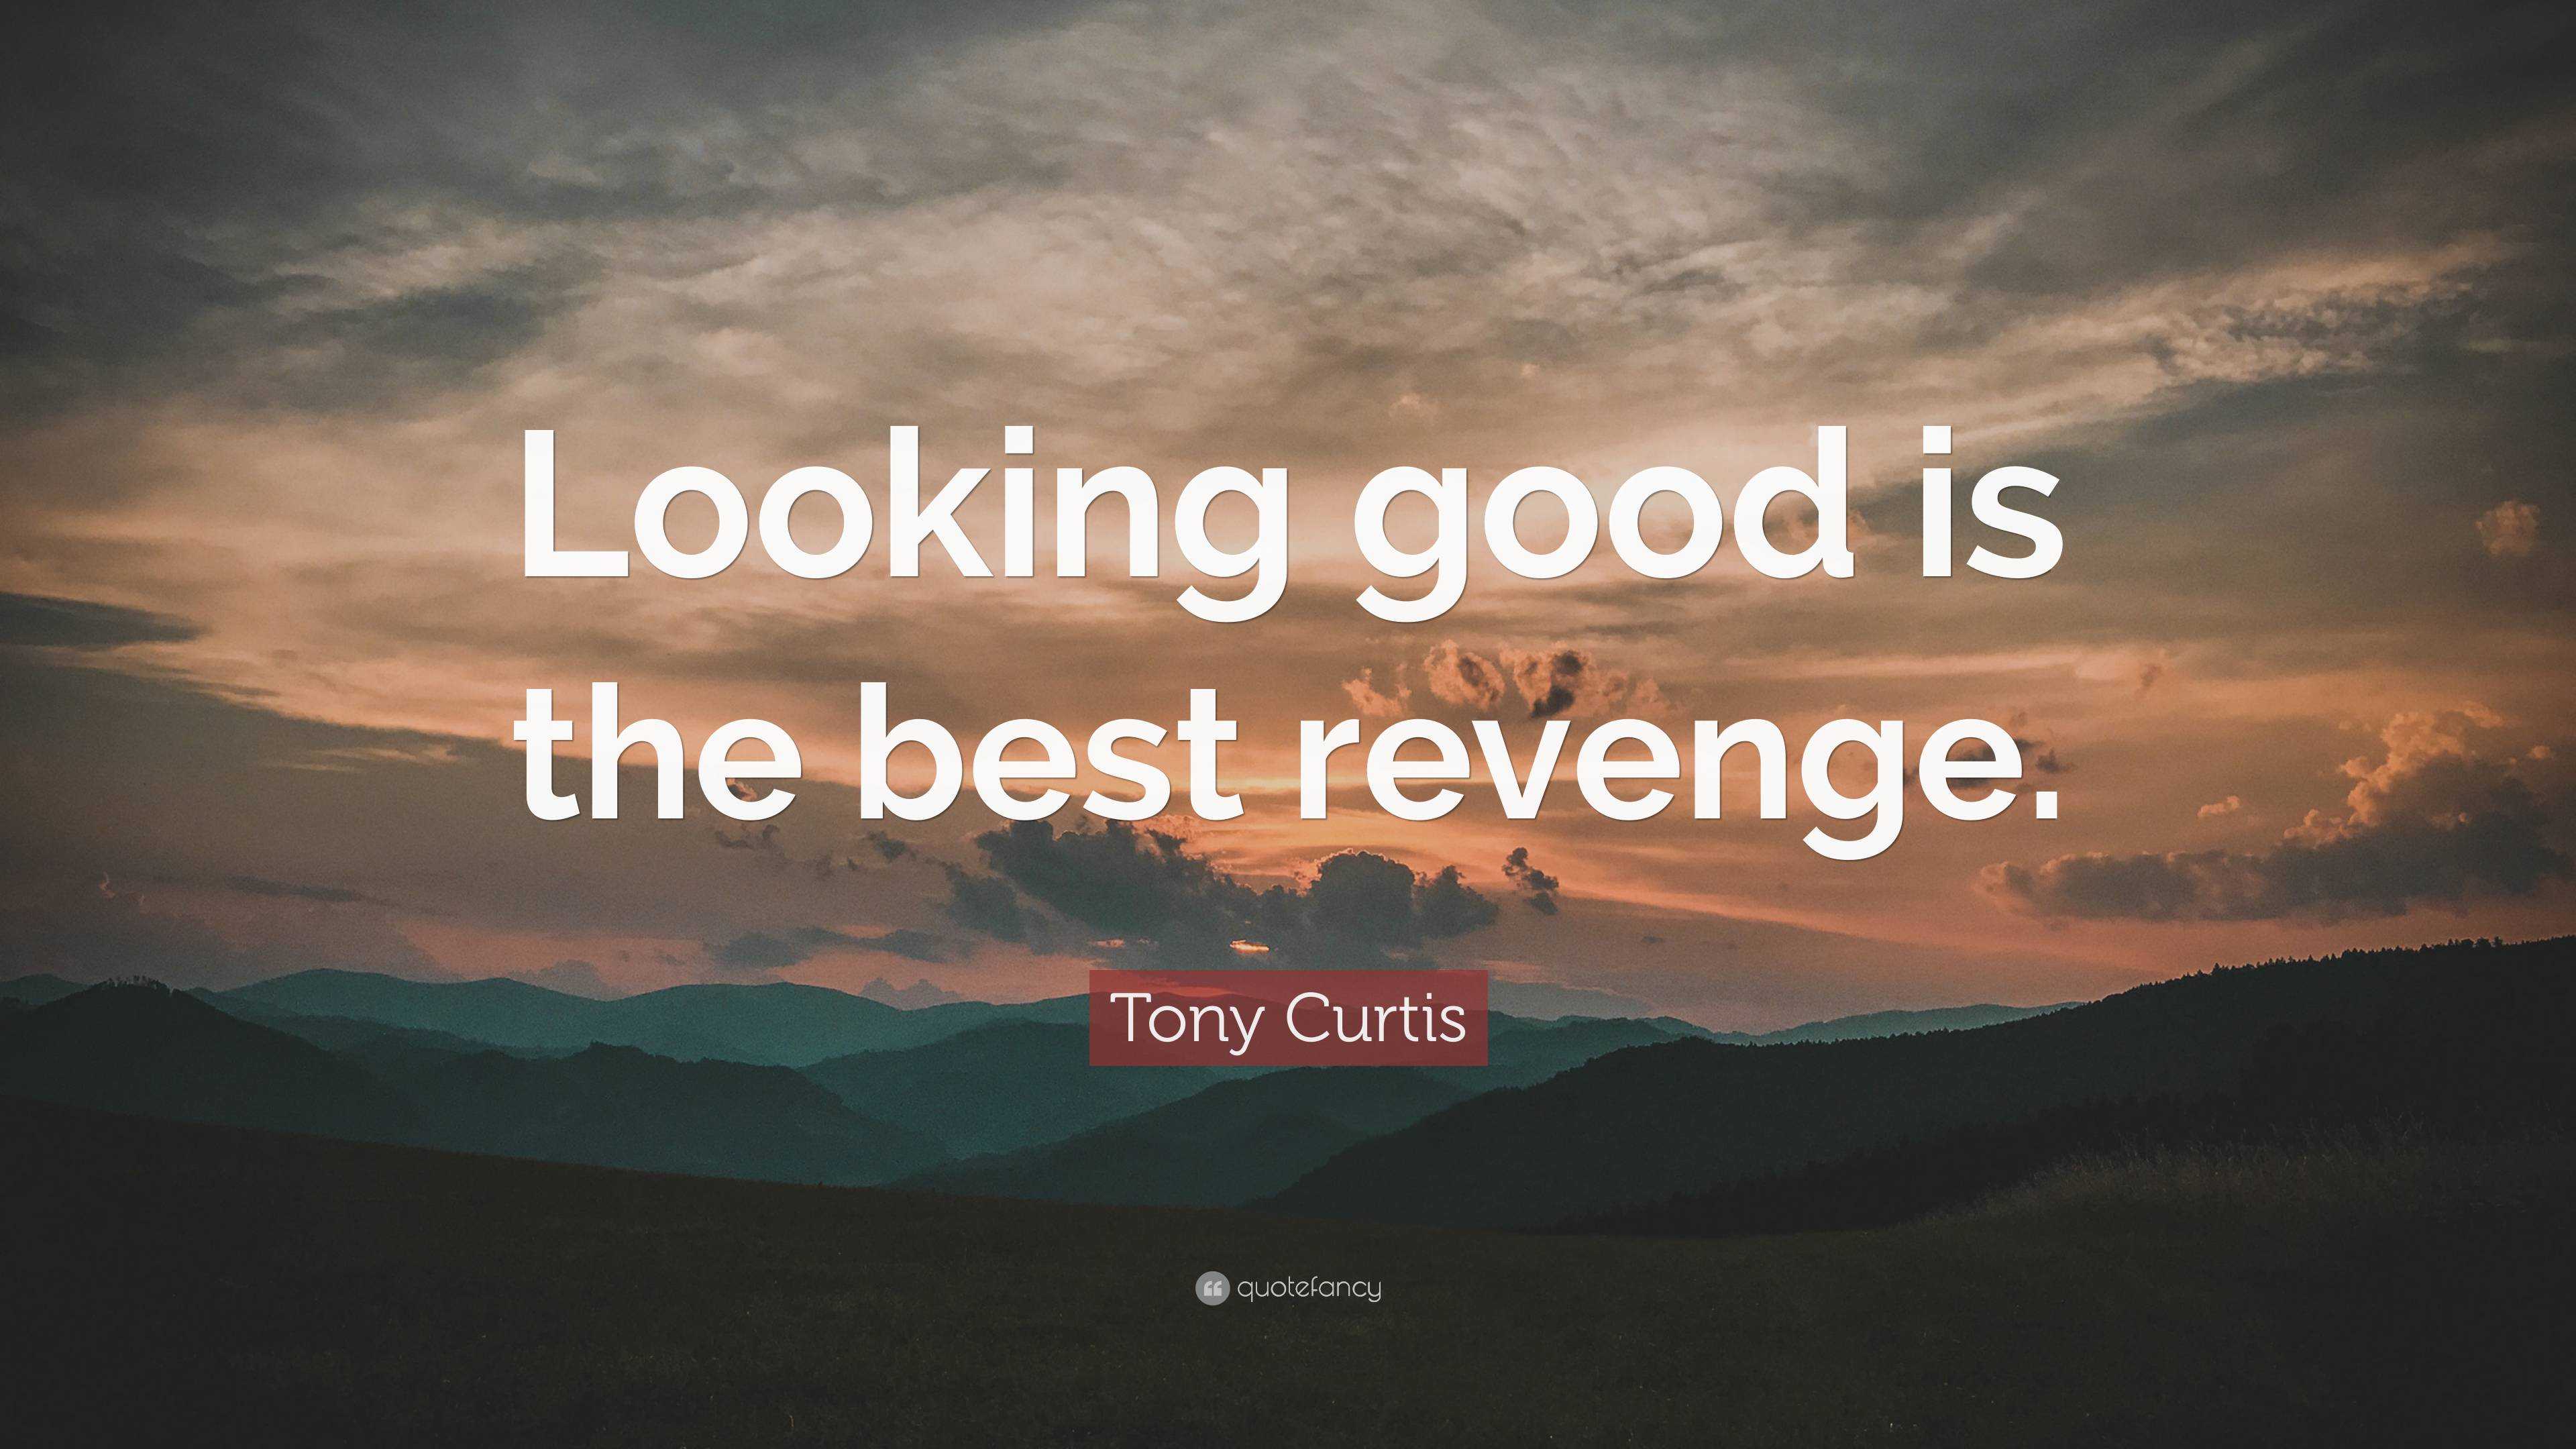 Tony Curtis Quote: “Looking good is the best revenge.”